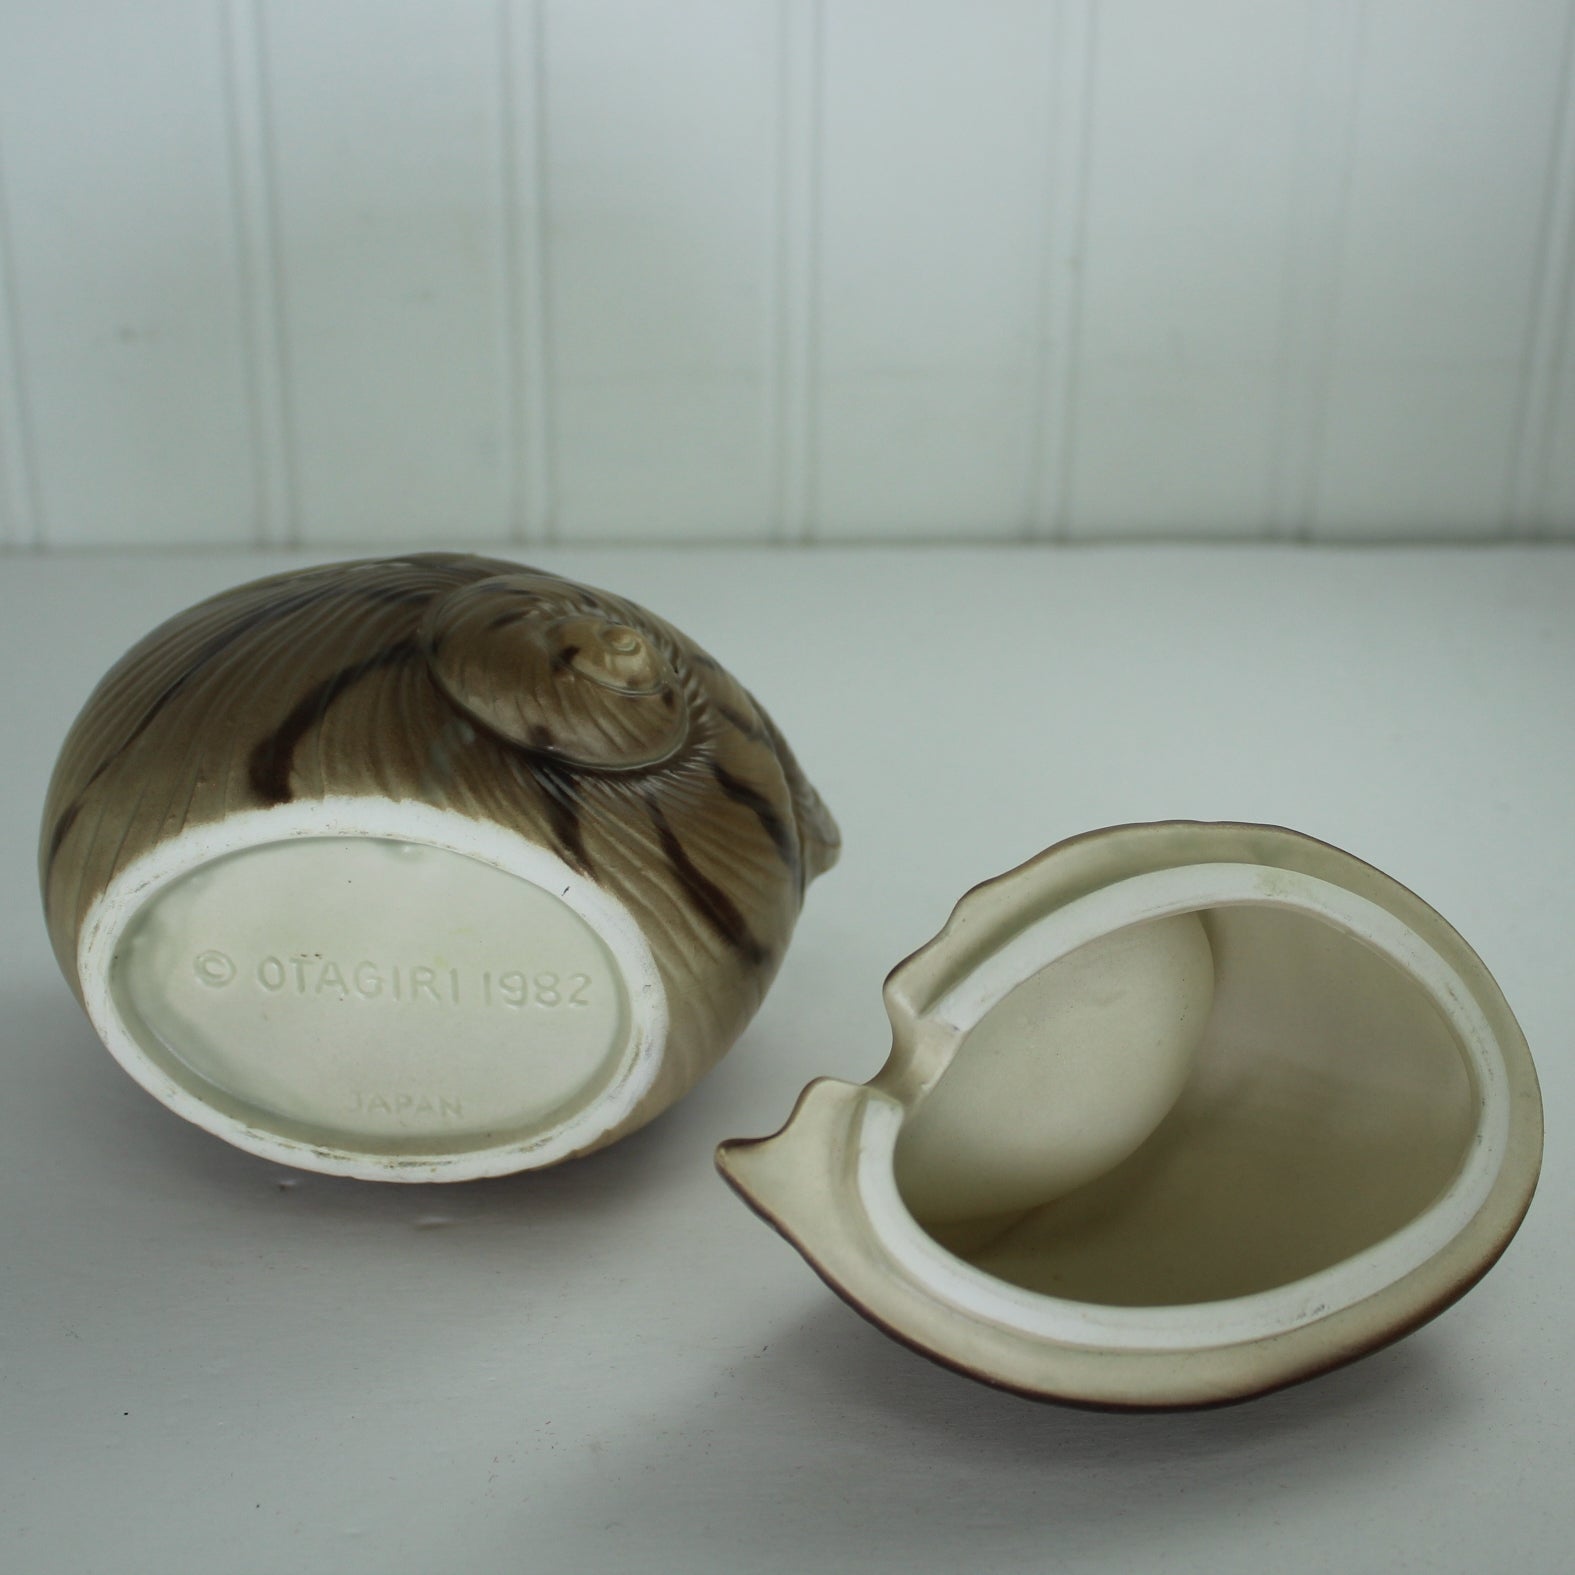 Unique Shell Shape Small Lidded Dish Otagiri 1982 Really Sweet Different bottom and interior view imprint year maker